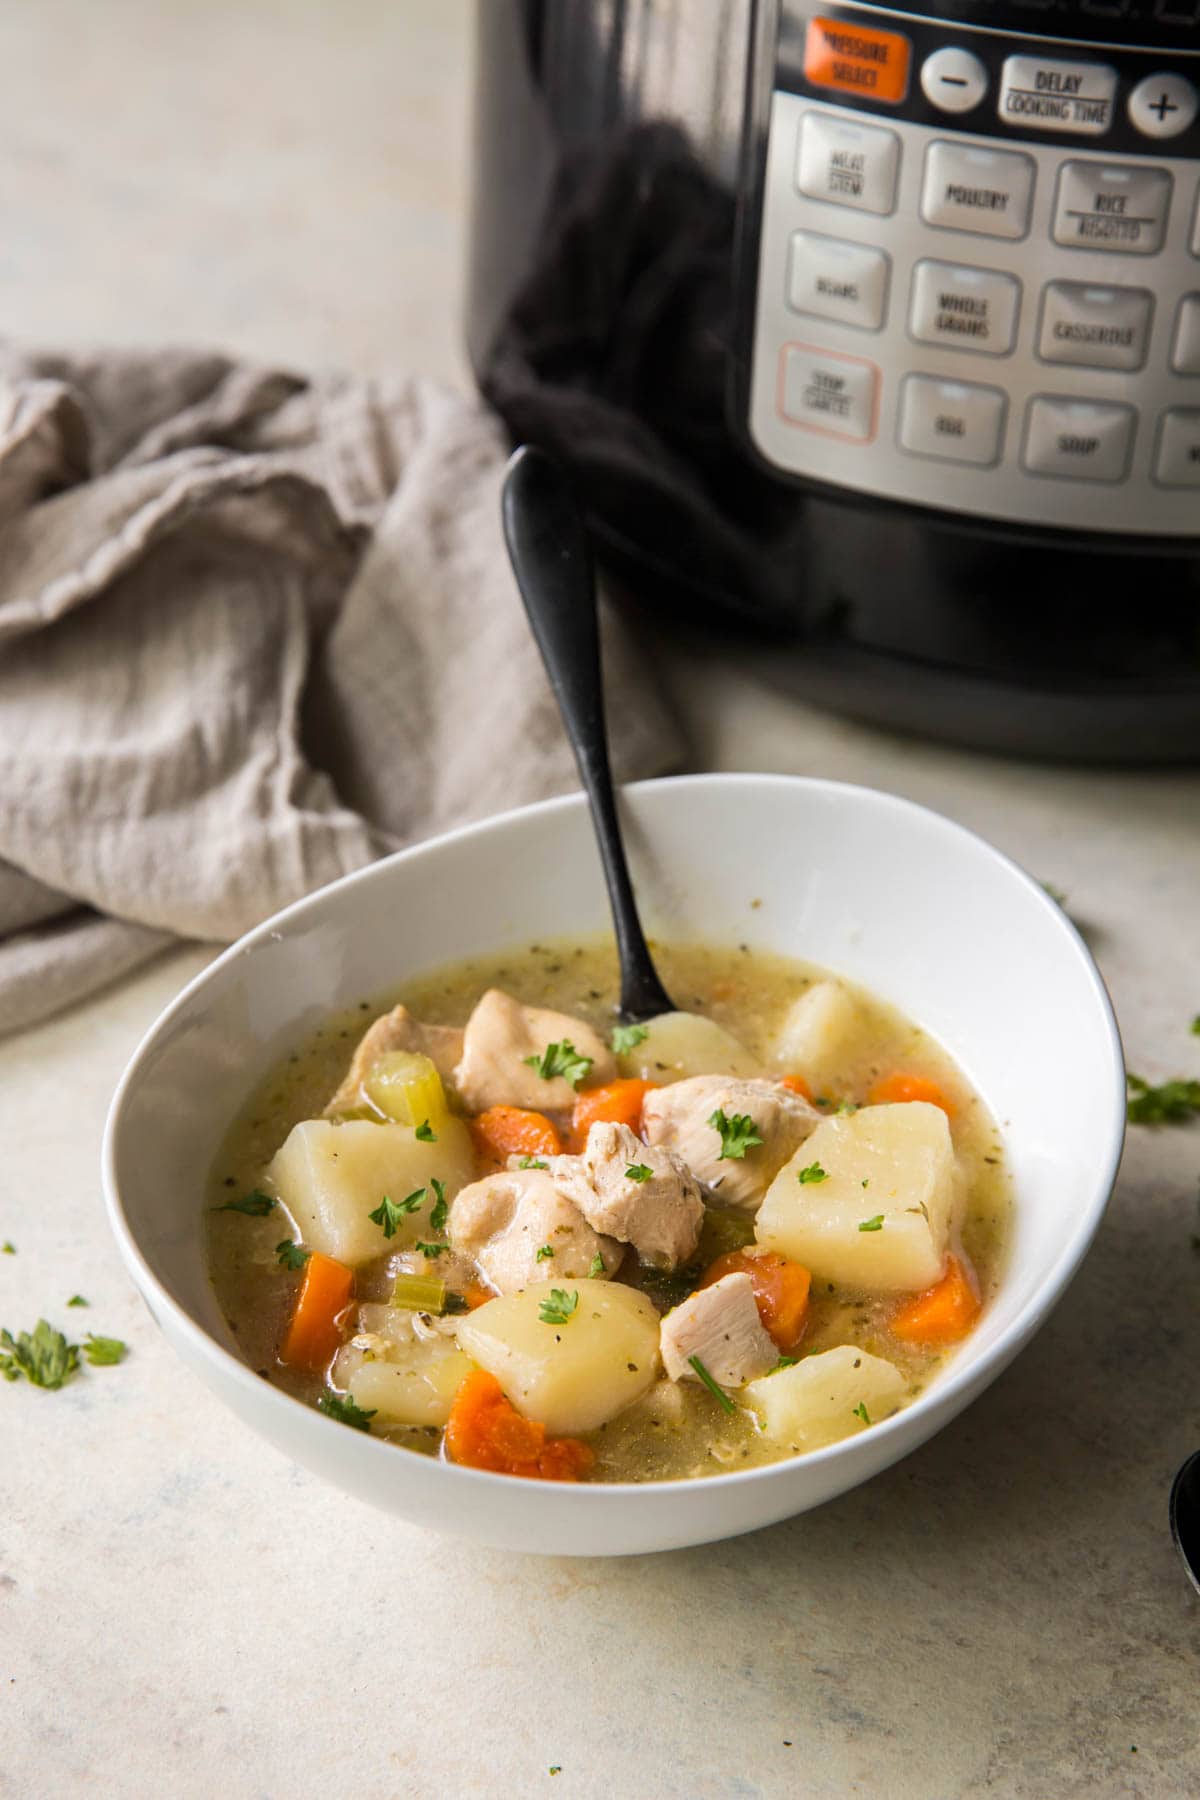 chicken stew in a white bowl on a table next to an instant pot